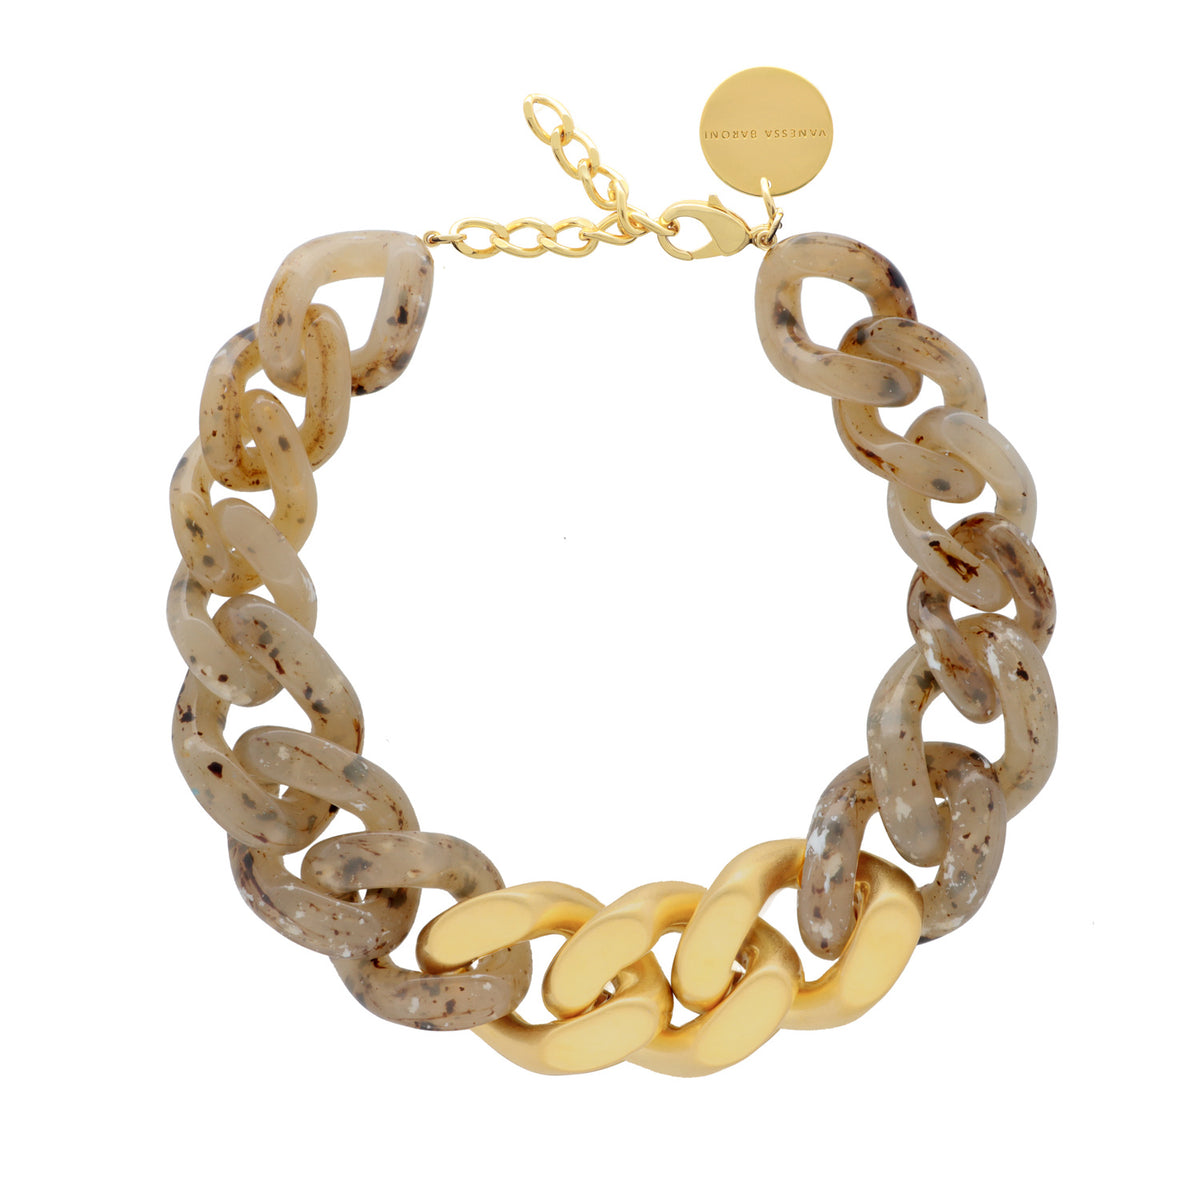 GREAT Necklace With Gold - Light Bernstein